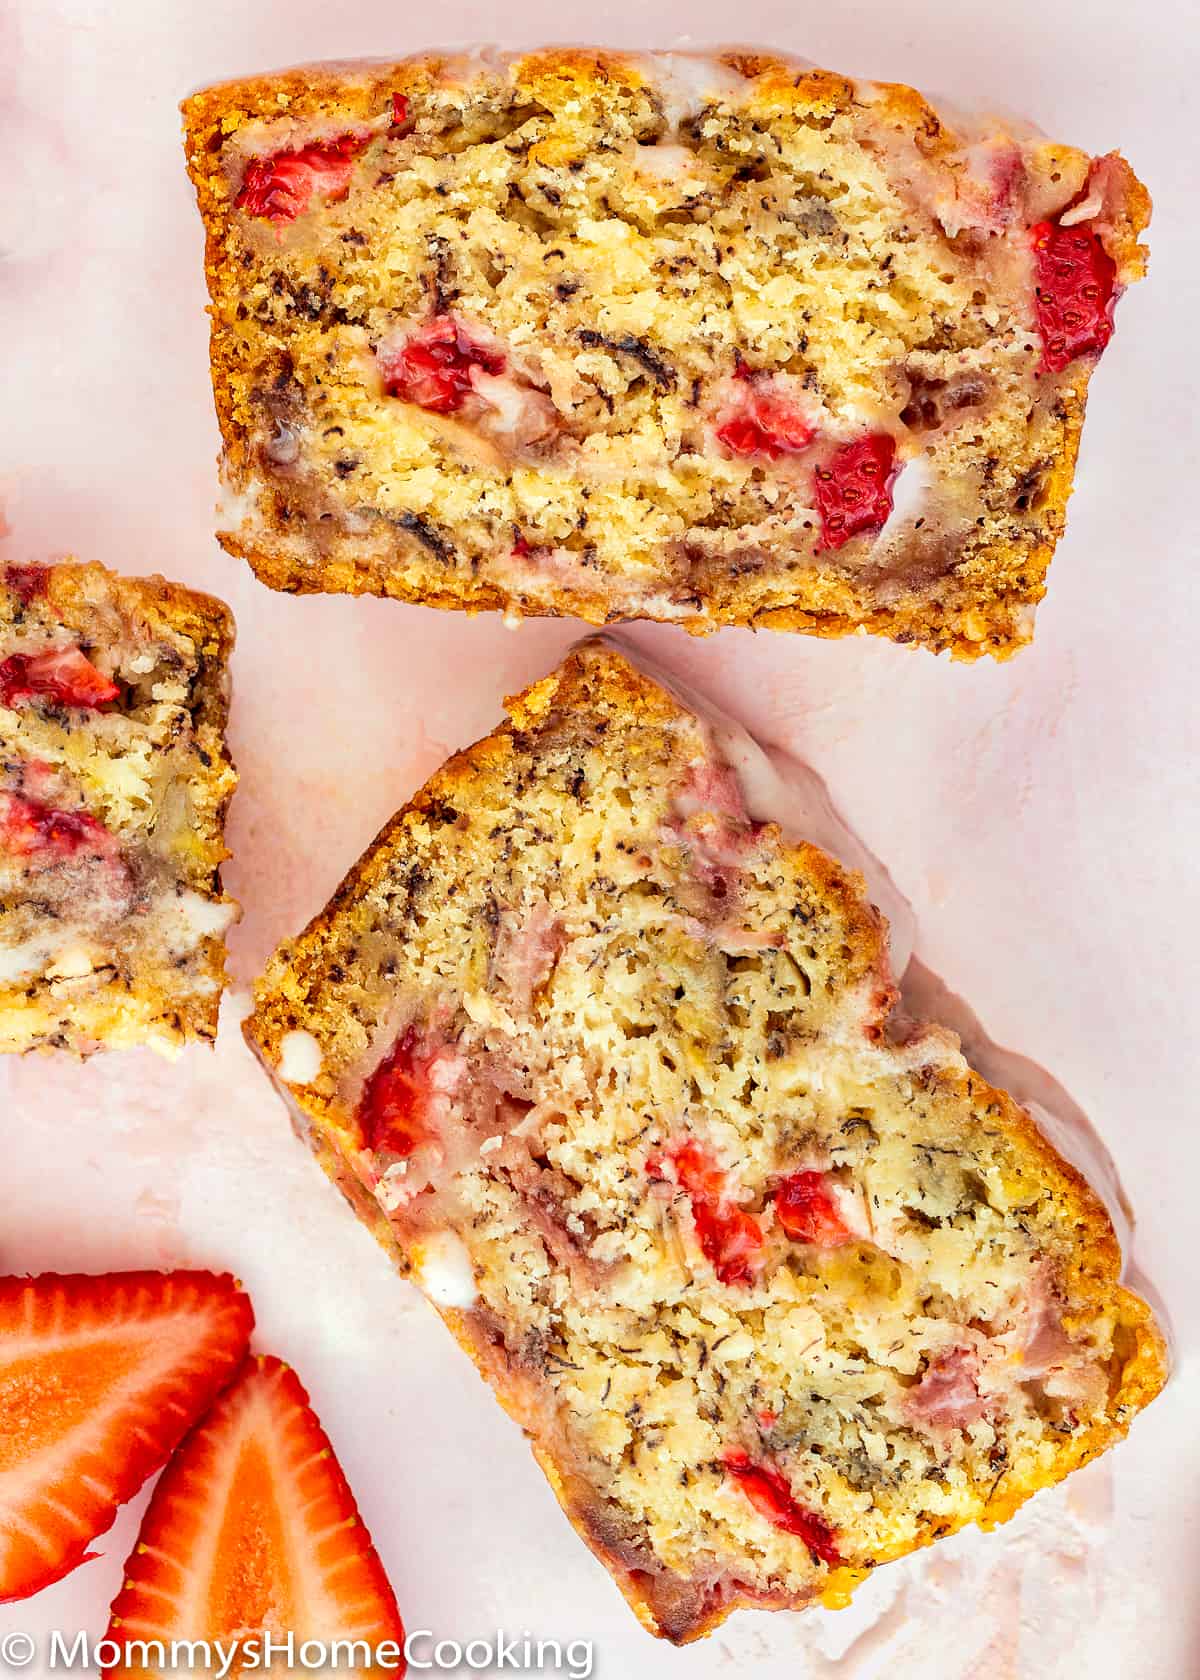 two slices of Eggless Strawberry Banana Bread.